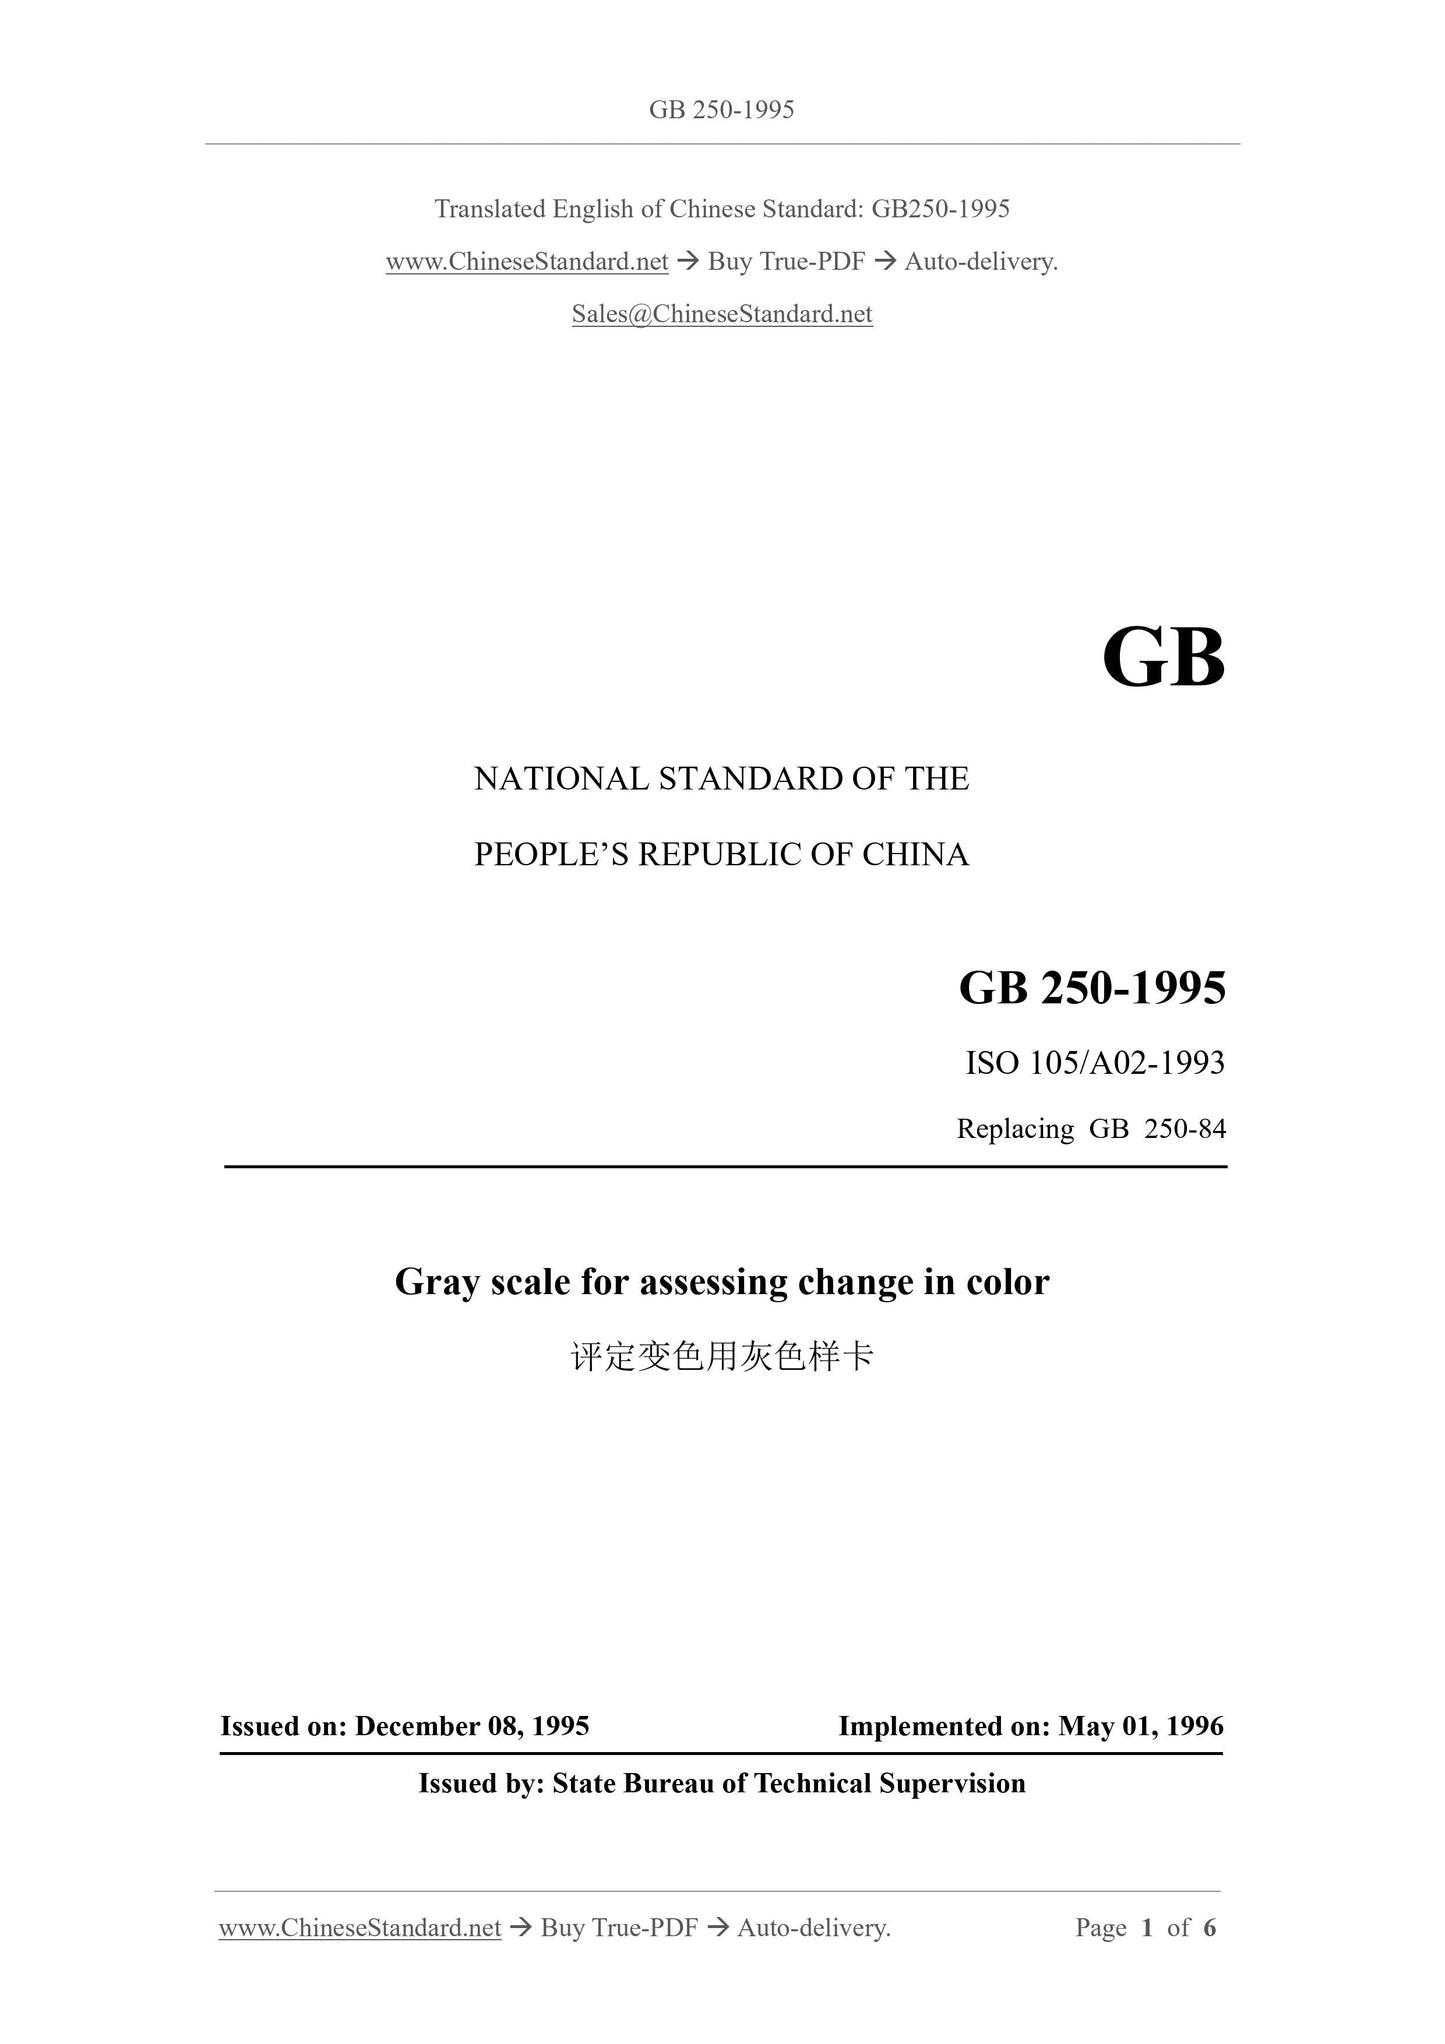 GB 250-1995 Page 1